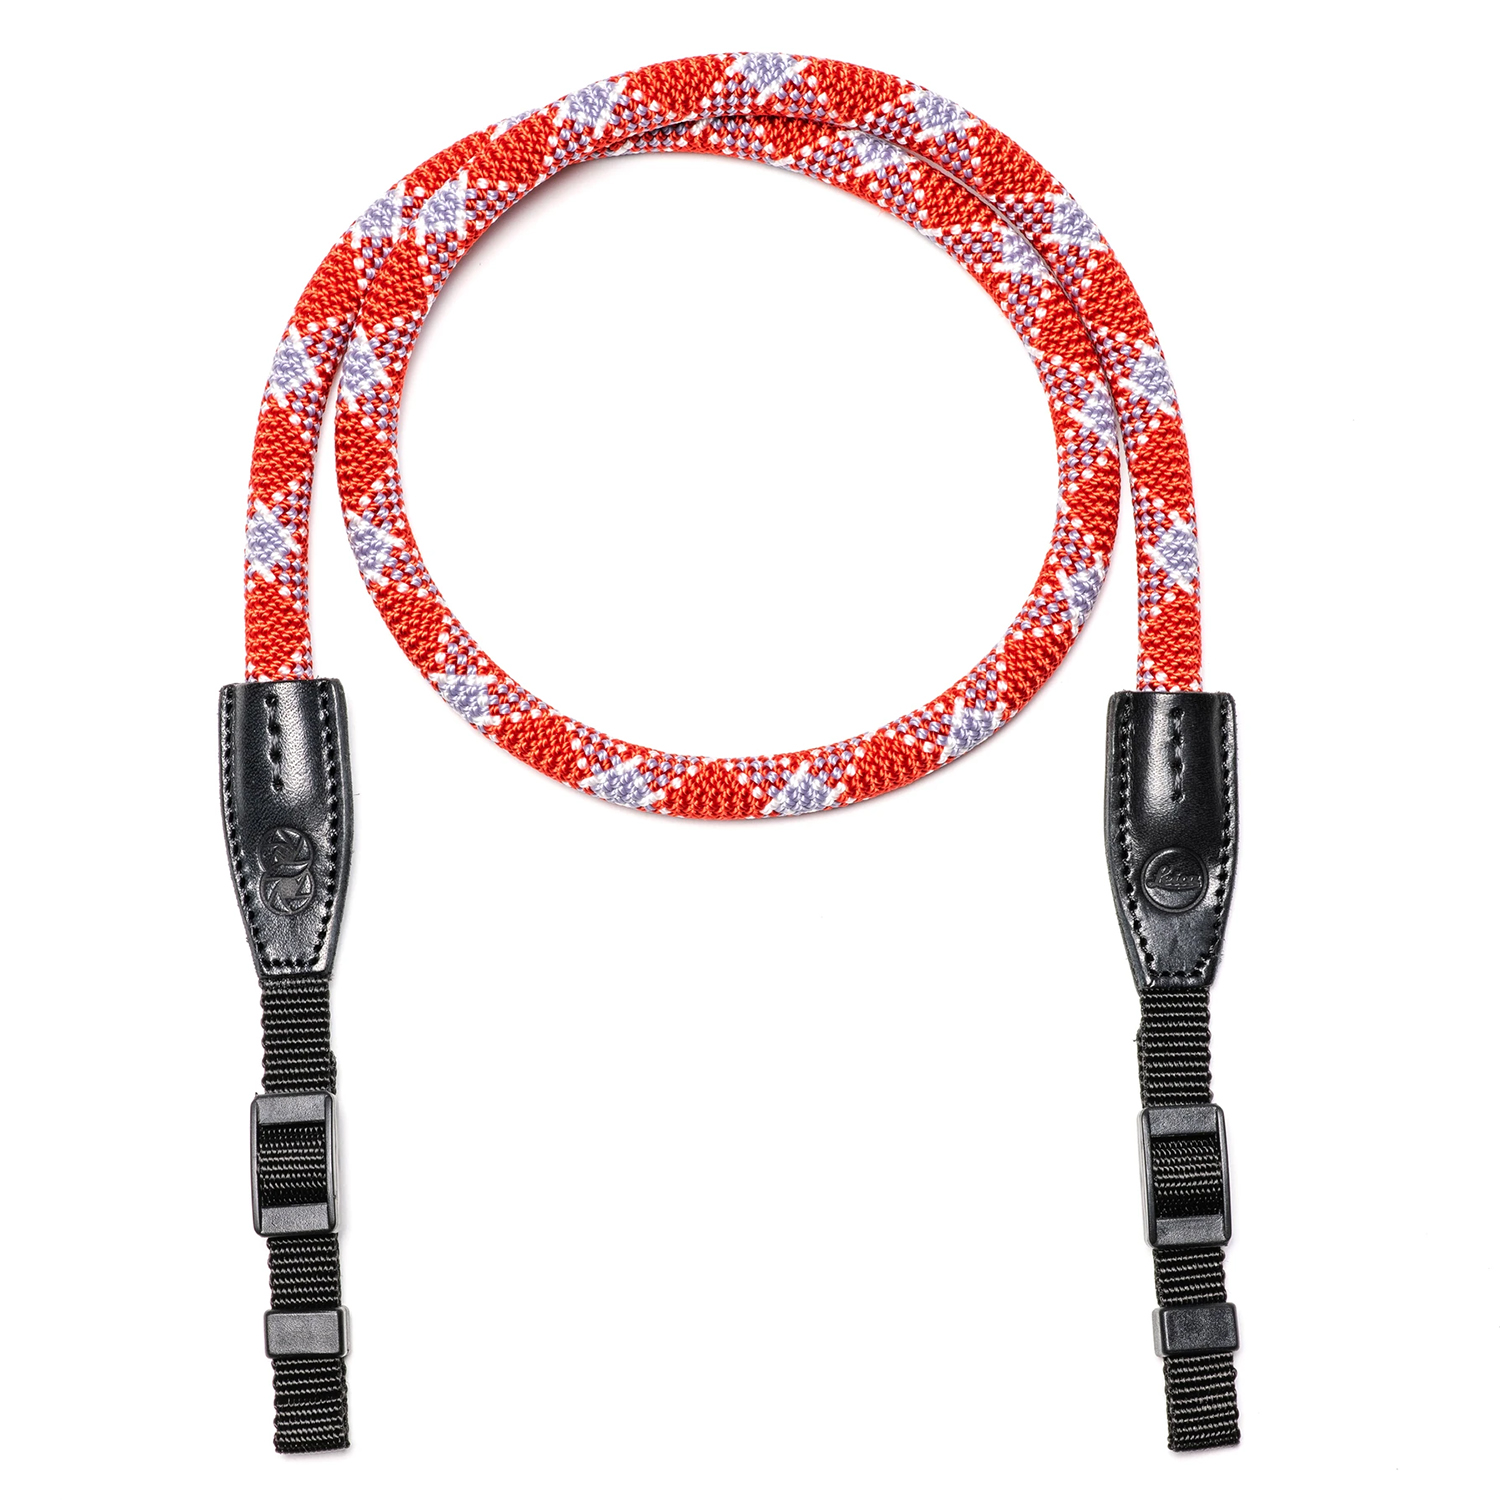 Leica Rope Strap Cooph, red check, Nylon | Leica Store - San Francisco